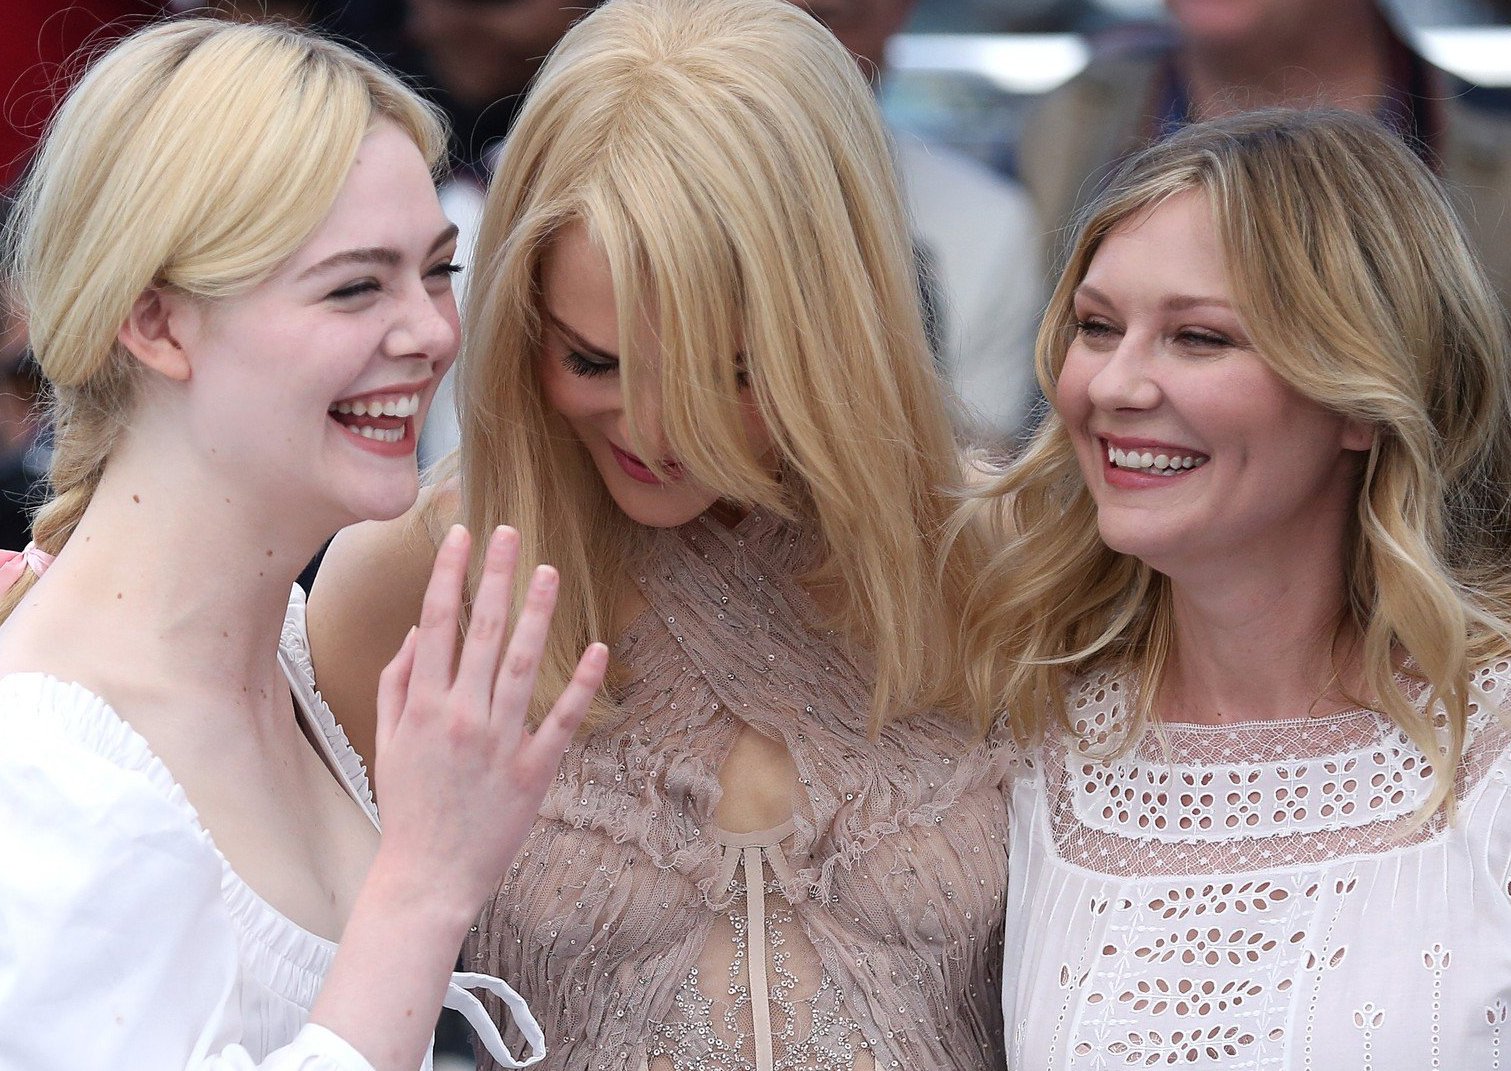 Elle Fanning (L), Nicole Kidman (C) and Kirsten Dunst arrive at a photocall for the film "The Beguiled" during the 70th annual Cannes International Film Festival in Cannes, France on May 24, 2017. Photo by /UPI, Image: 357117222, License: Rights-managed, Restrictions: , Model Release: no, Credit line: Profimedia, UPI